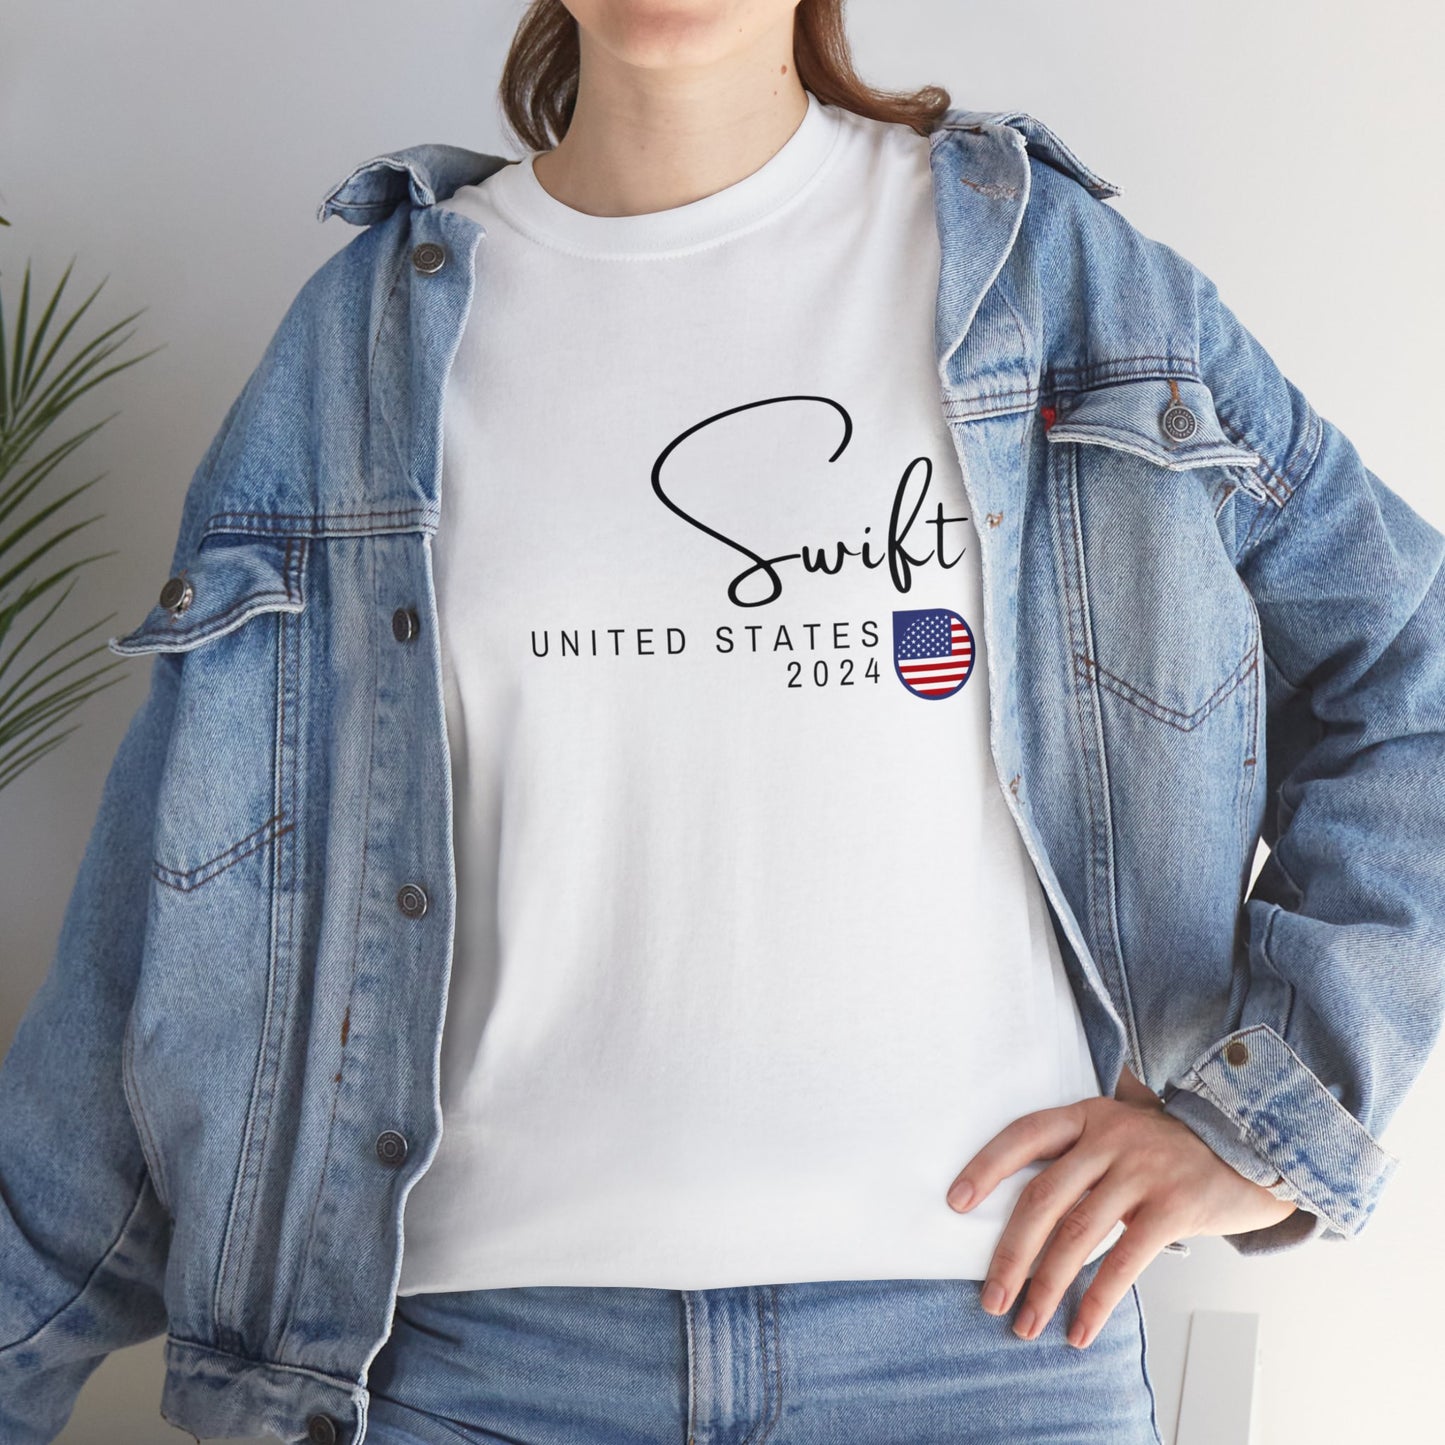 Swift Tour T-Shirt United States Concert Tee